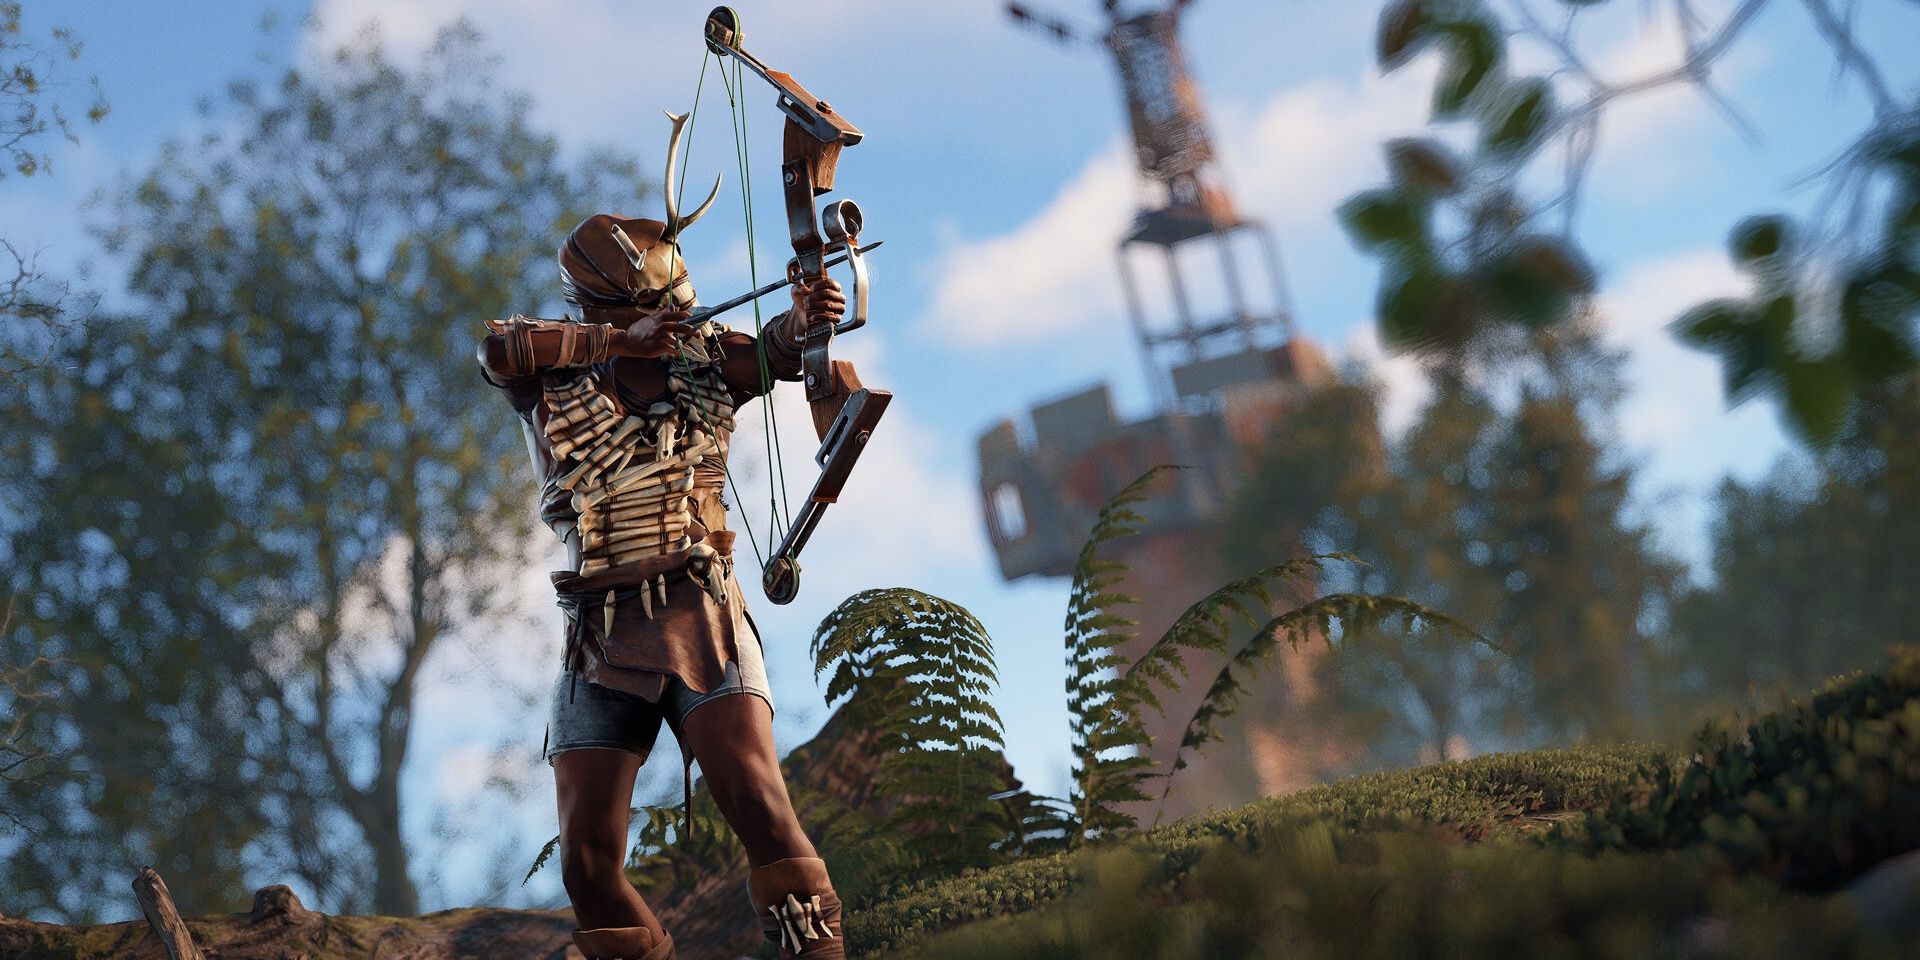 A player who is aiming to shoot using a bow in Rust